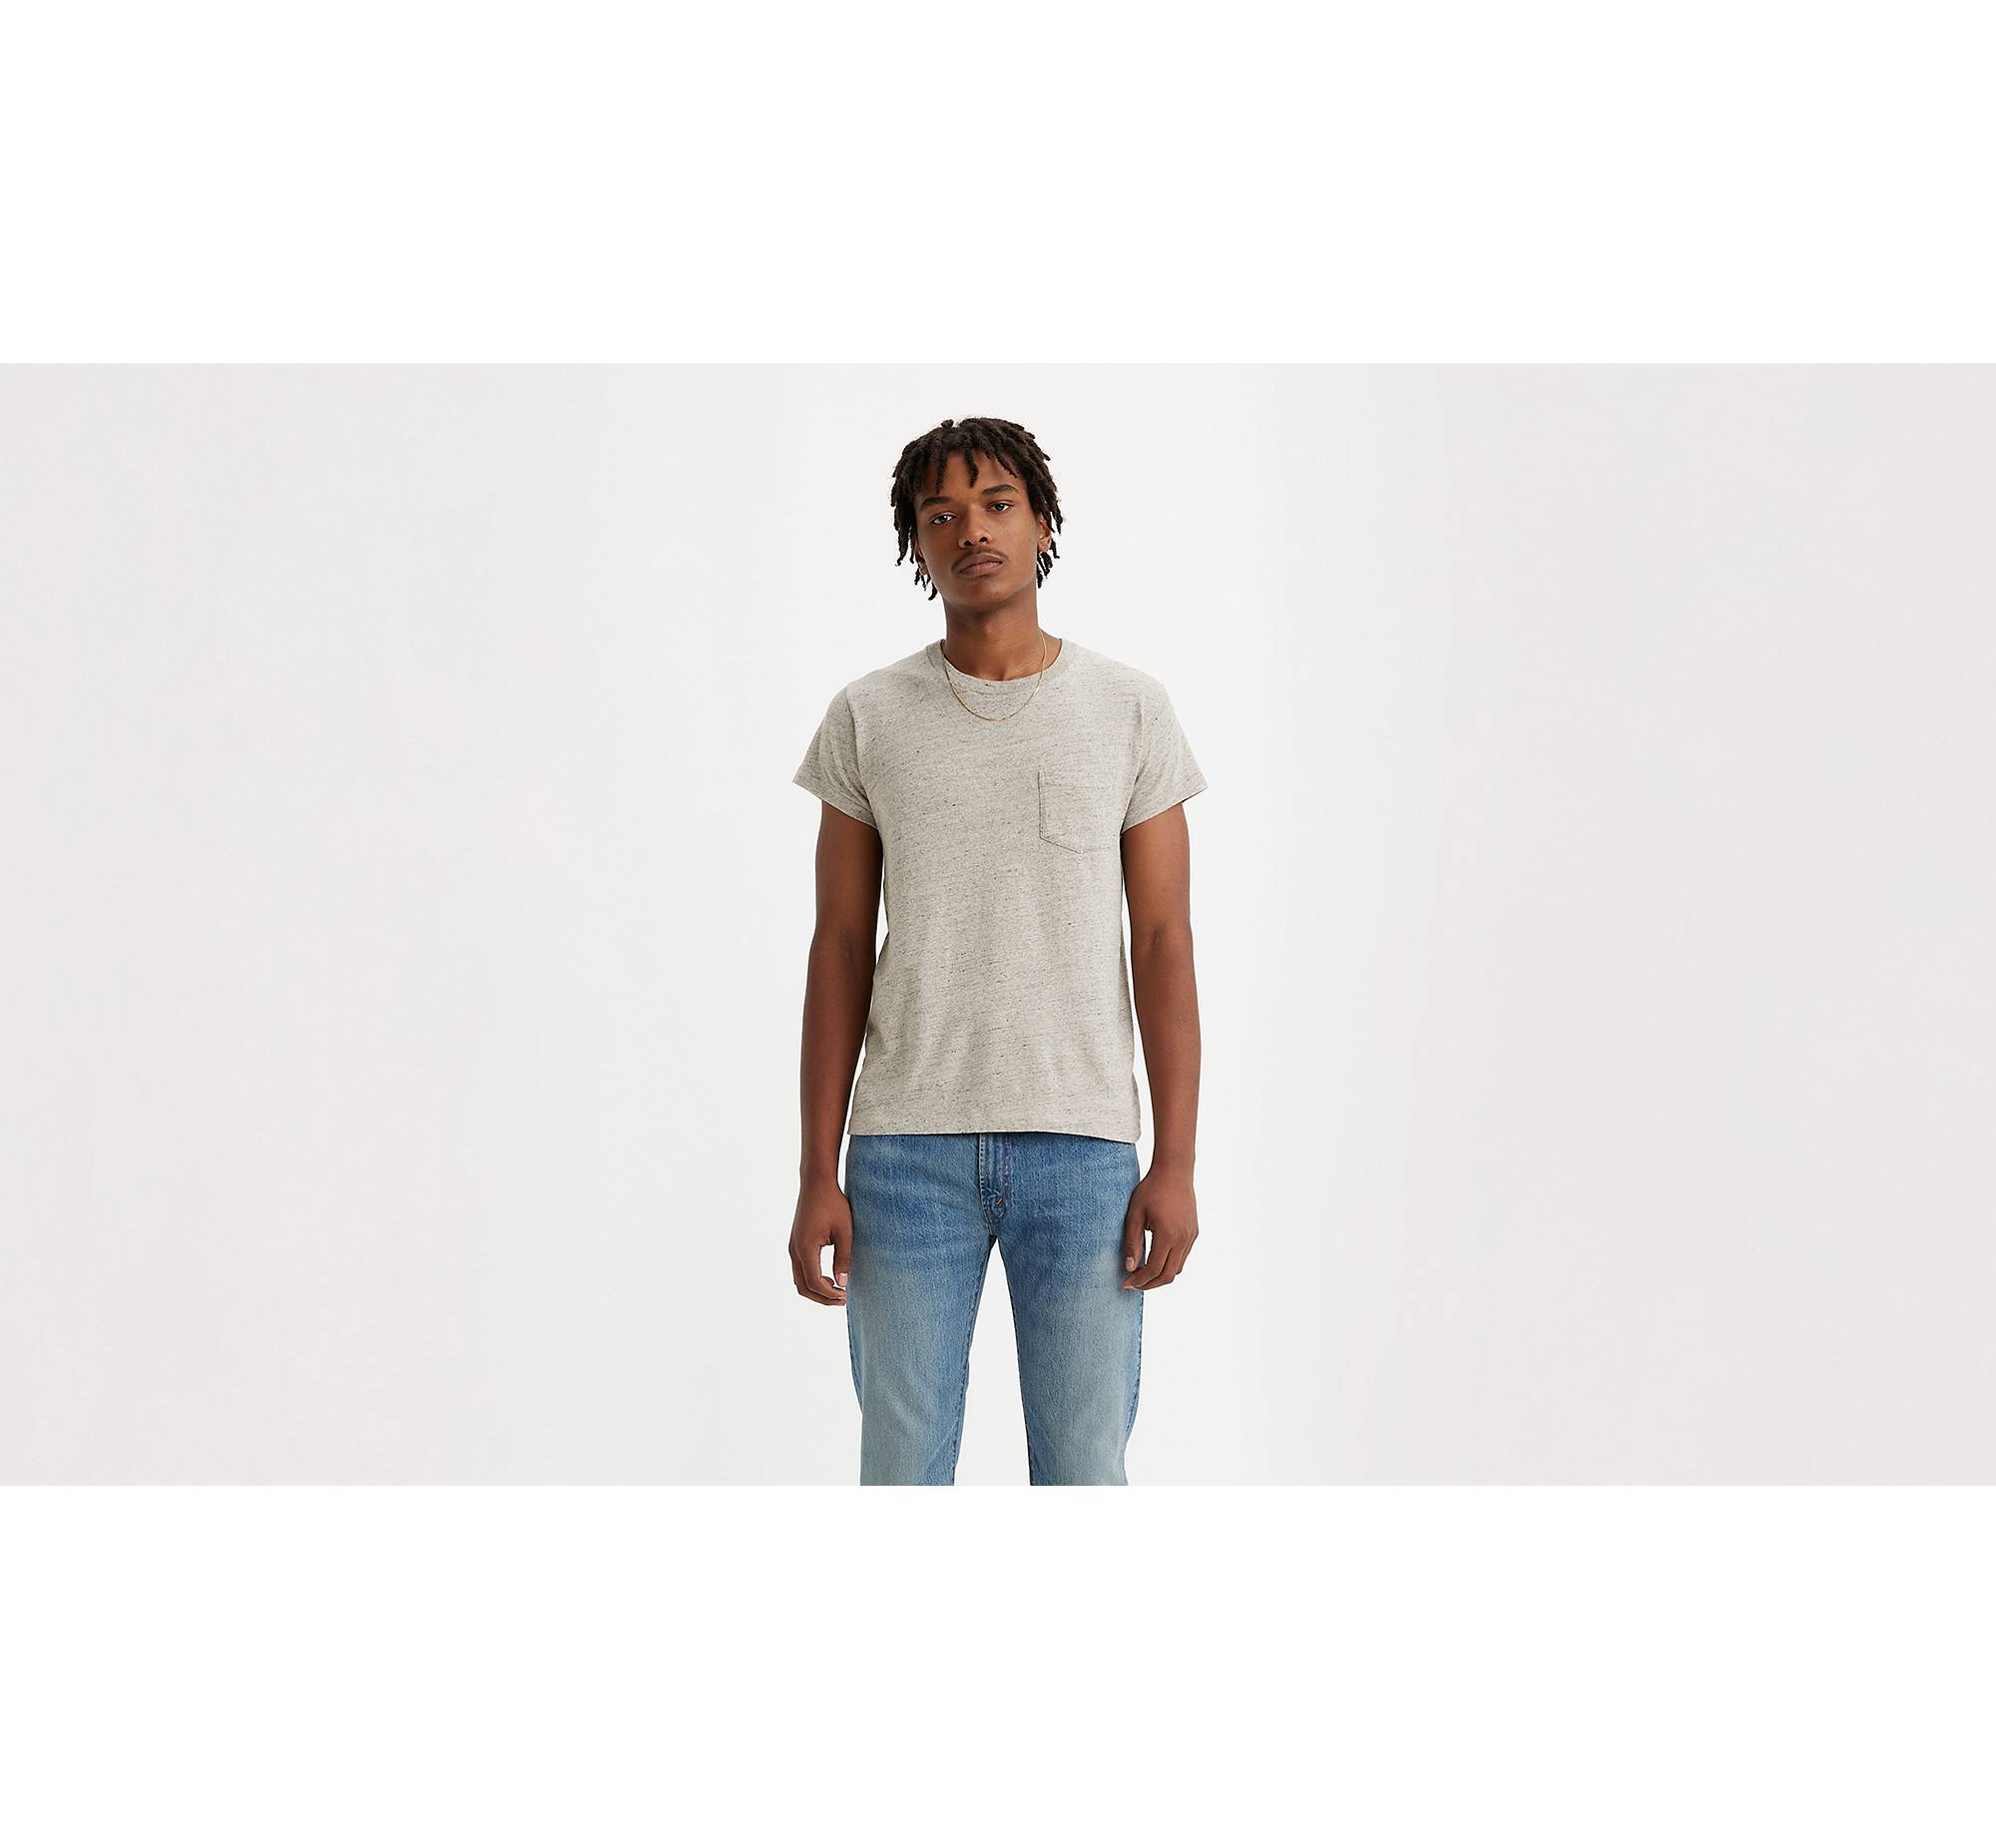 Levi's® Vintage Clothing 1950's Sportswear Tee - Neutral | Levi's® SI